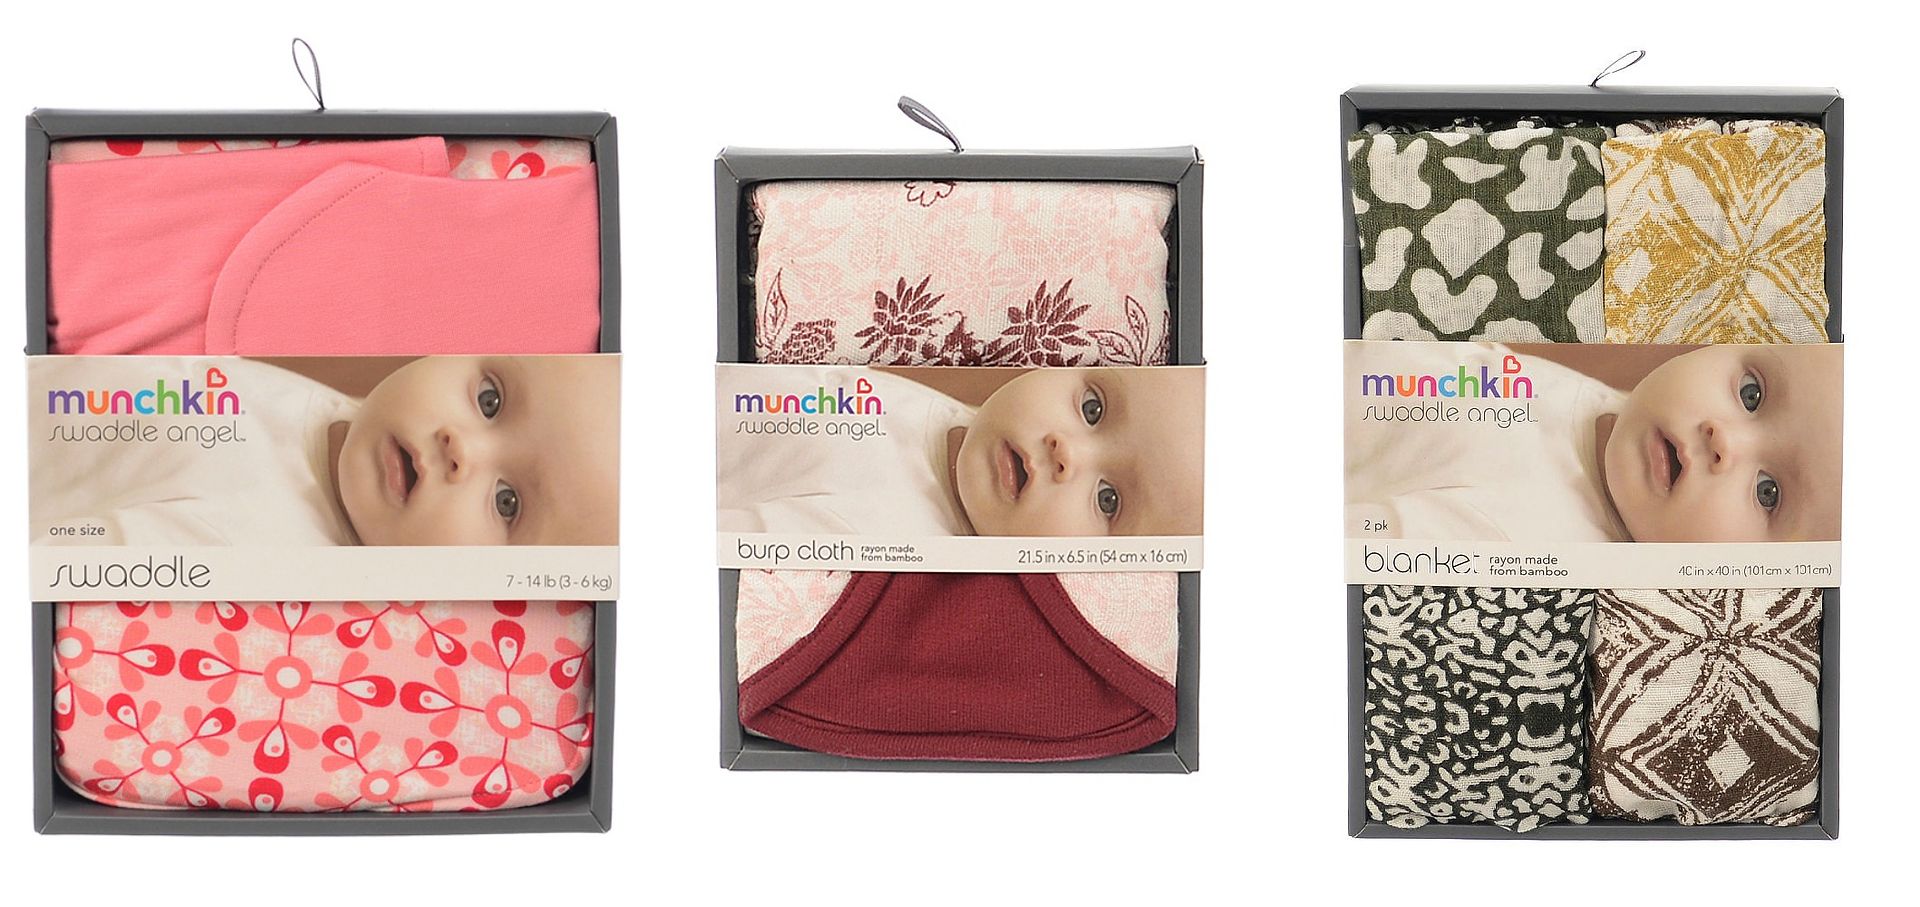 Munchkin Swaddle Angel collection 